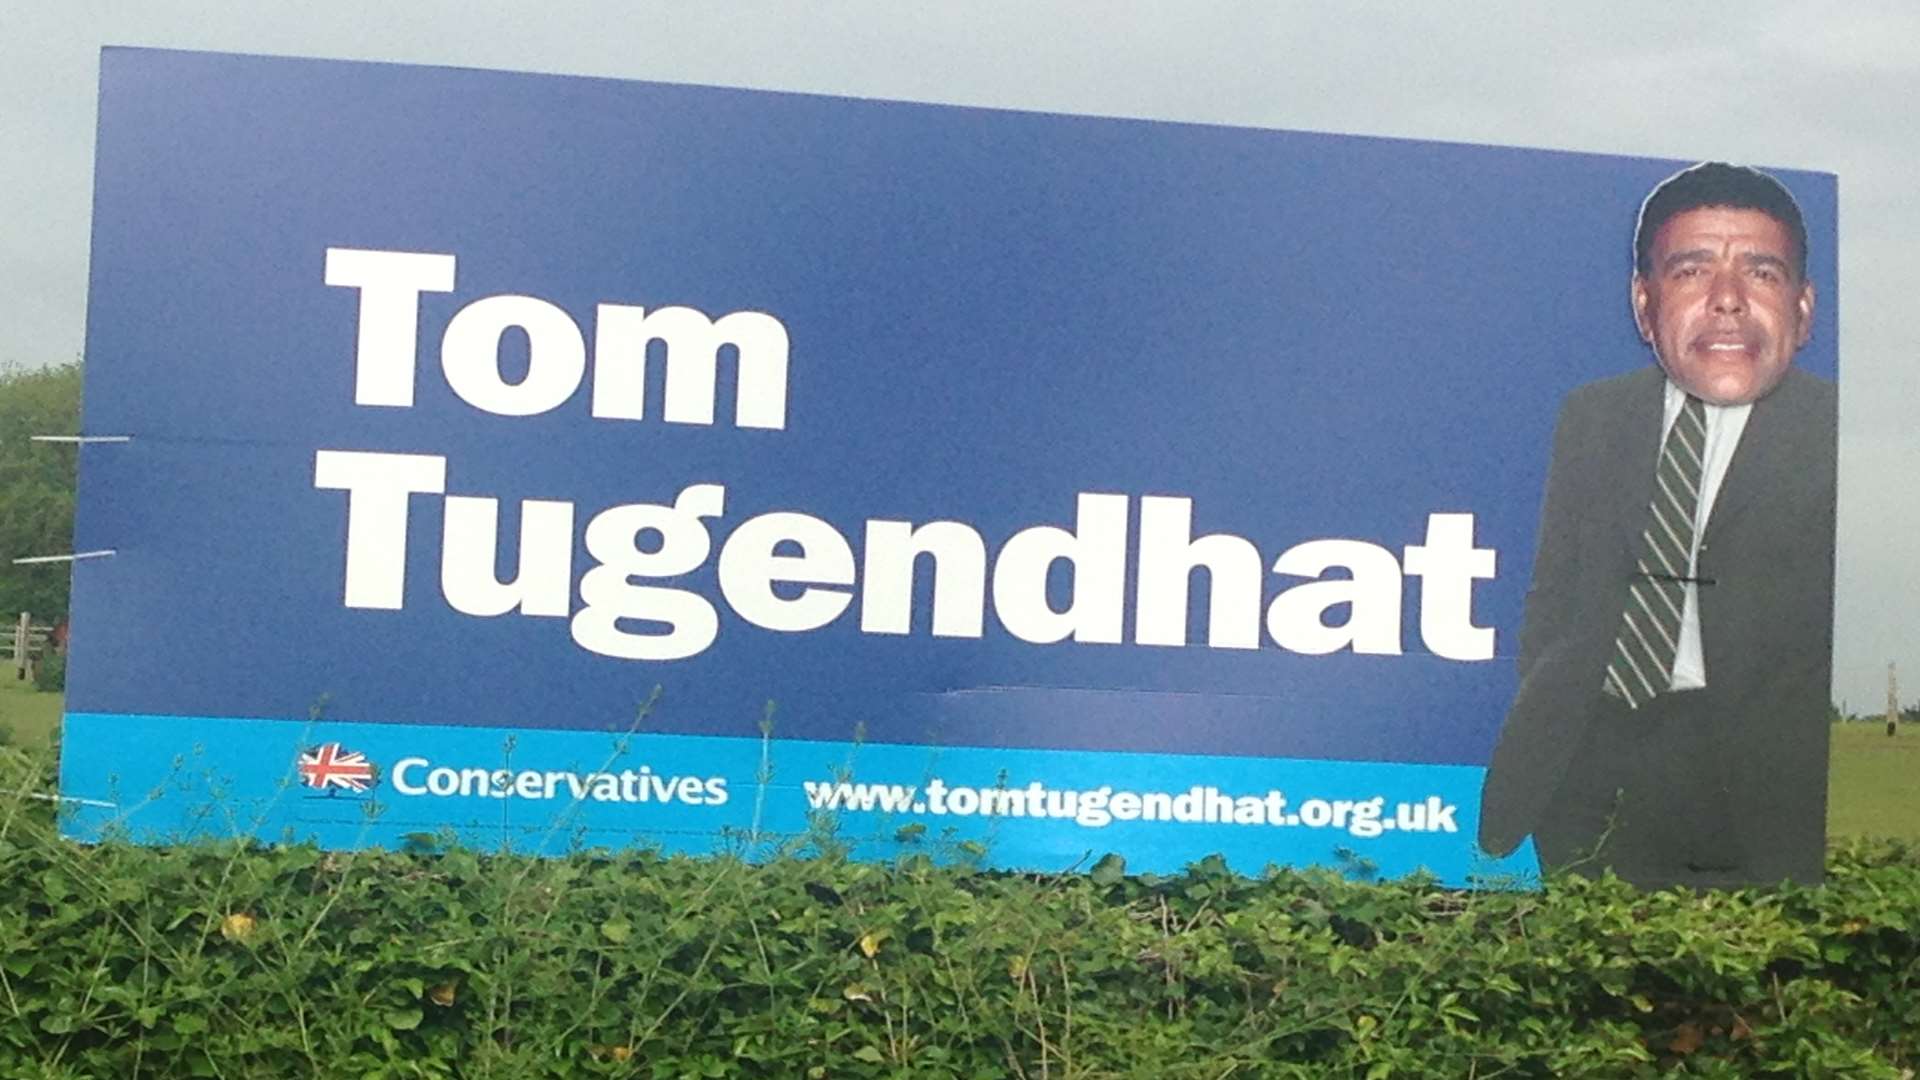 Mr Tugendhat's face was replaced with Chris Kamara's